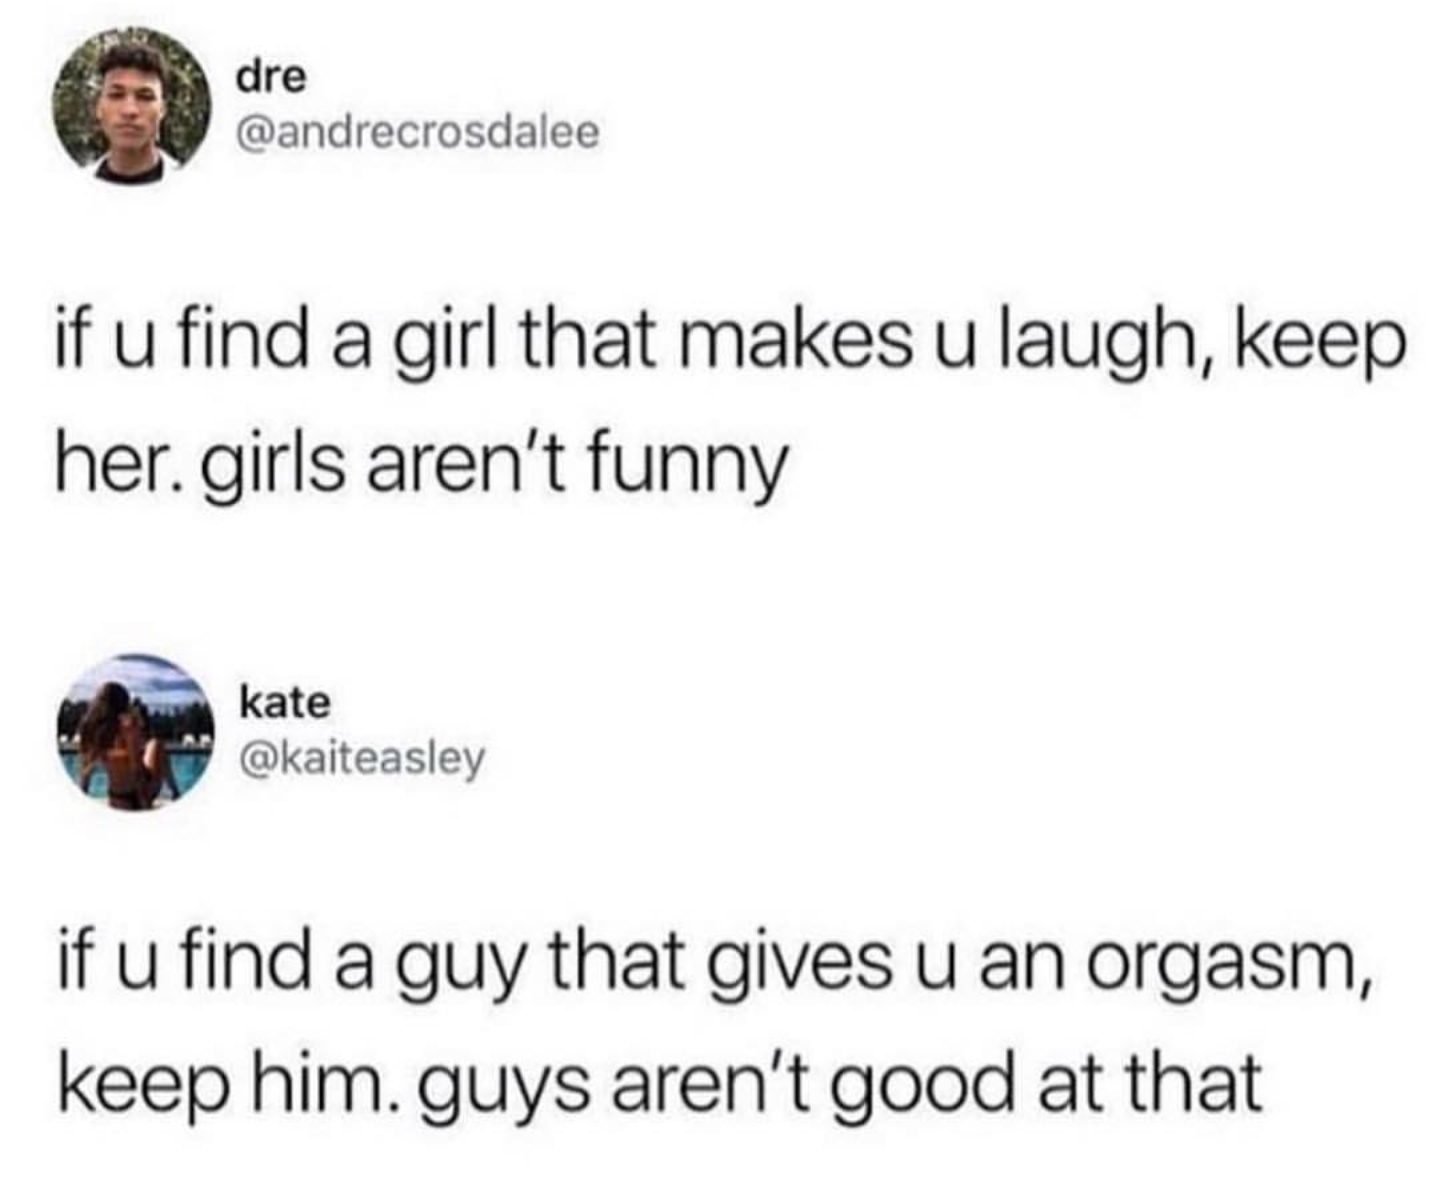 dumbest thing you believed as a child - dre if u find a girl that makes u laugh, keep her.girls aren't funny kate if u find a guy that gives u an orgasm, keep him. guys aren't good at that